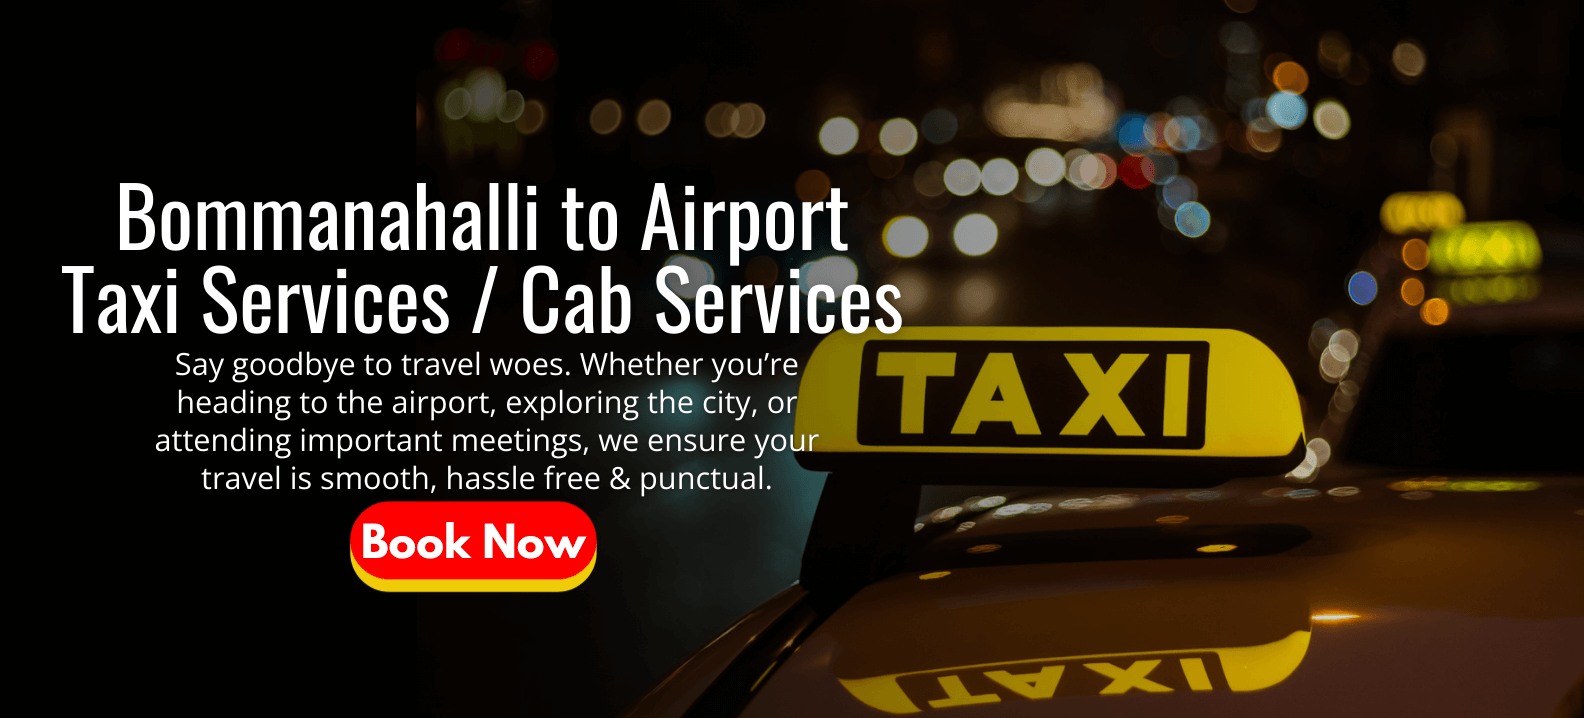 Bommanahalli to Airport Taxi Services _ Cab Services